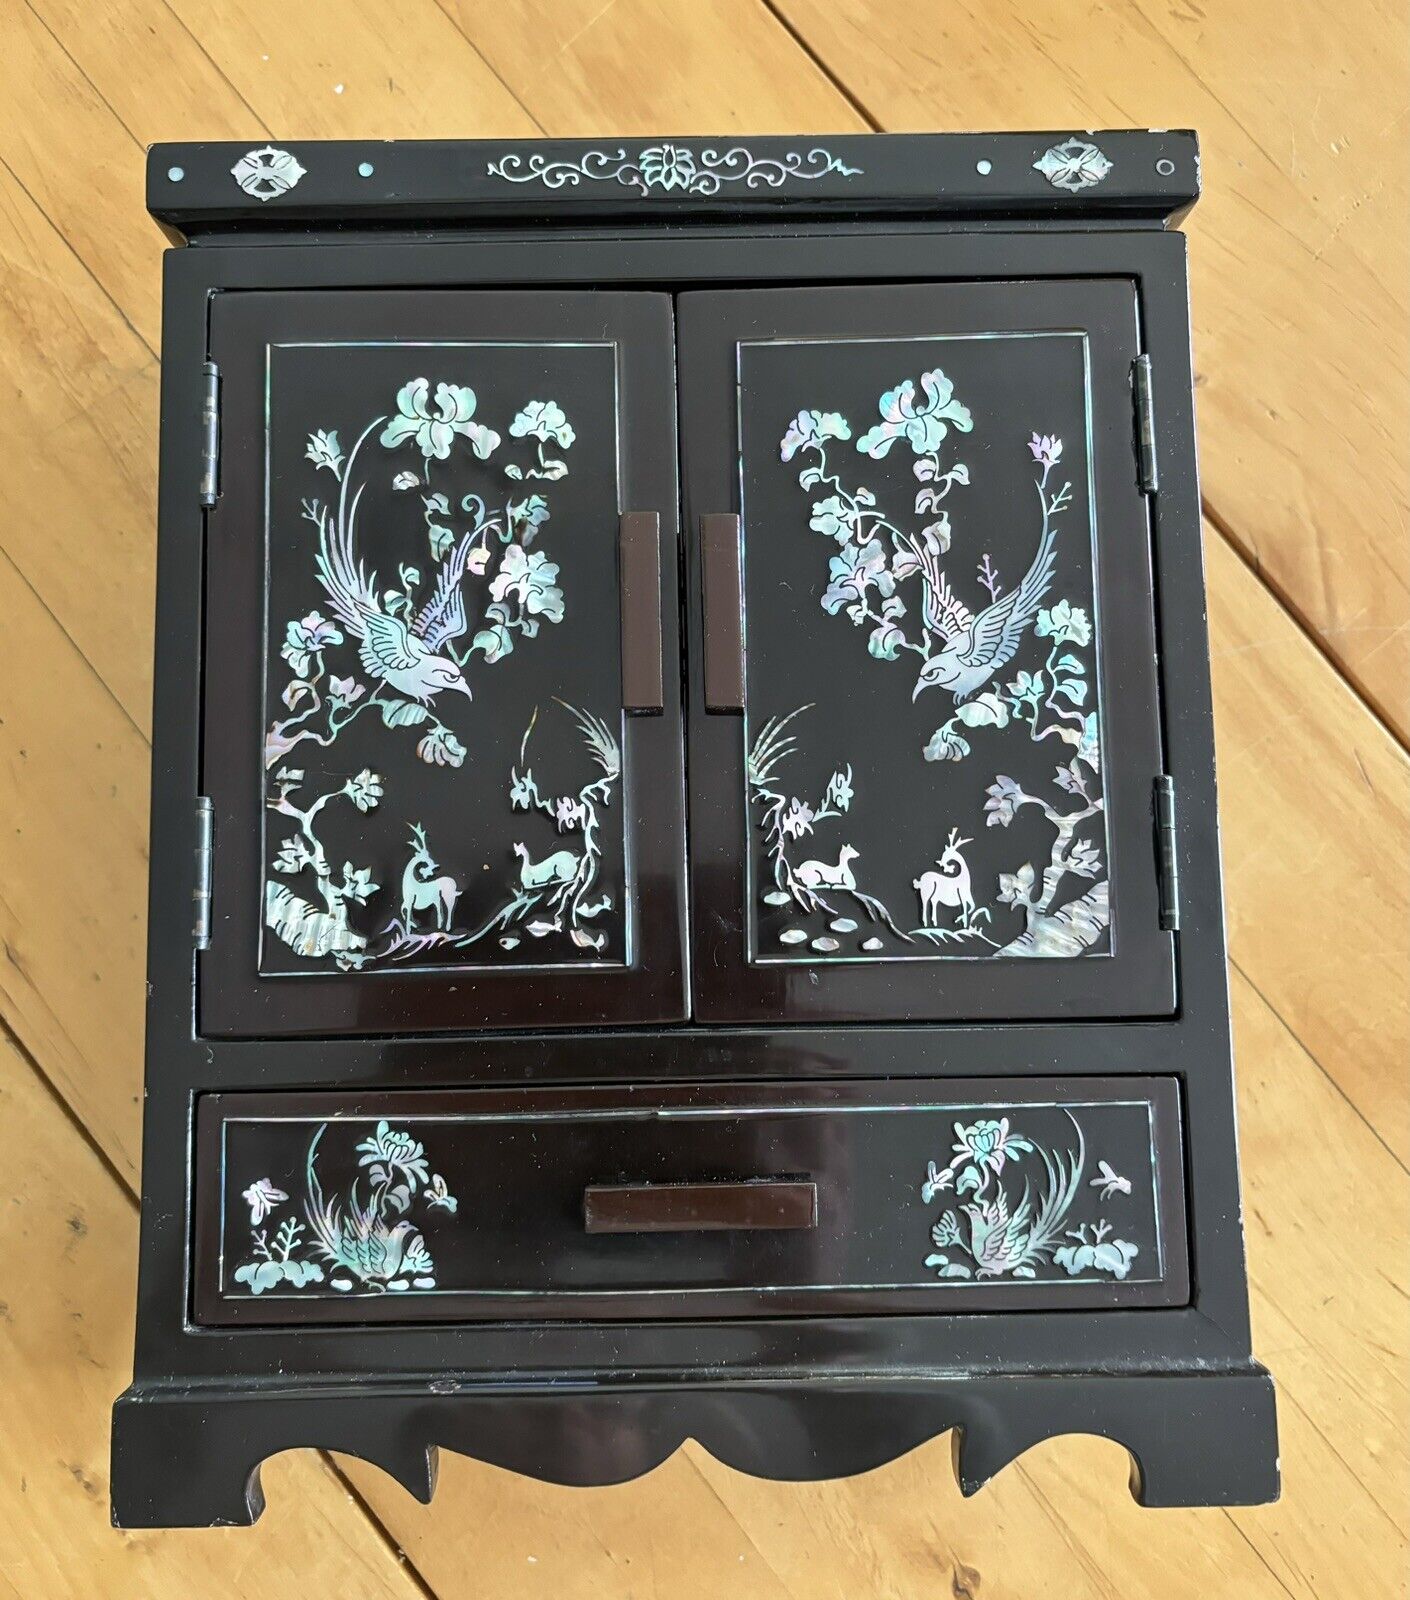 VTG Asian Oriental Black Lacquer Mother of Pearl Jewelry 4-Drawer Chest Cabinet